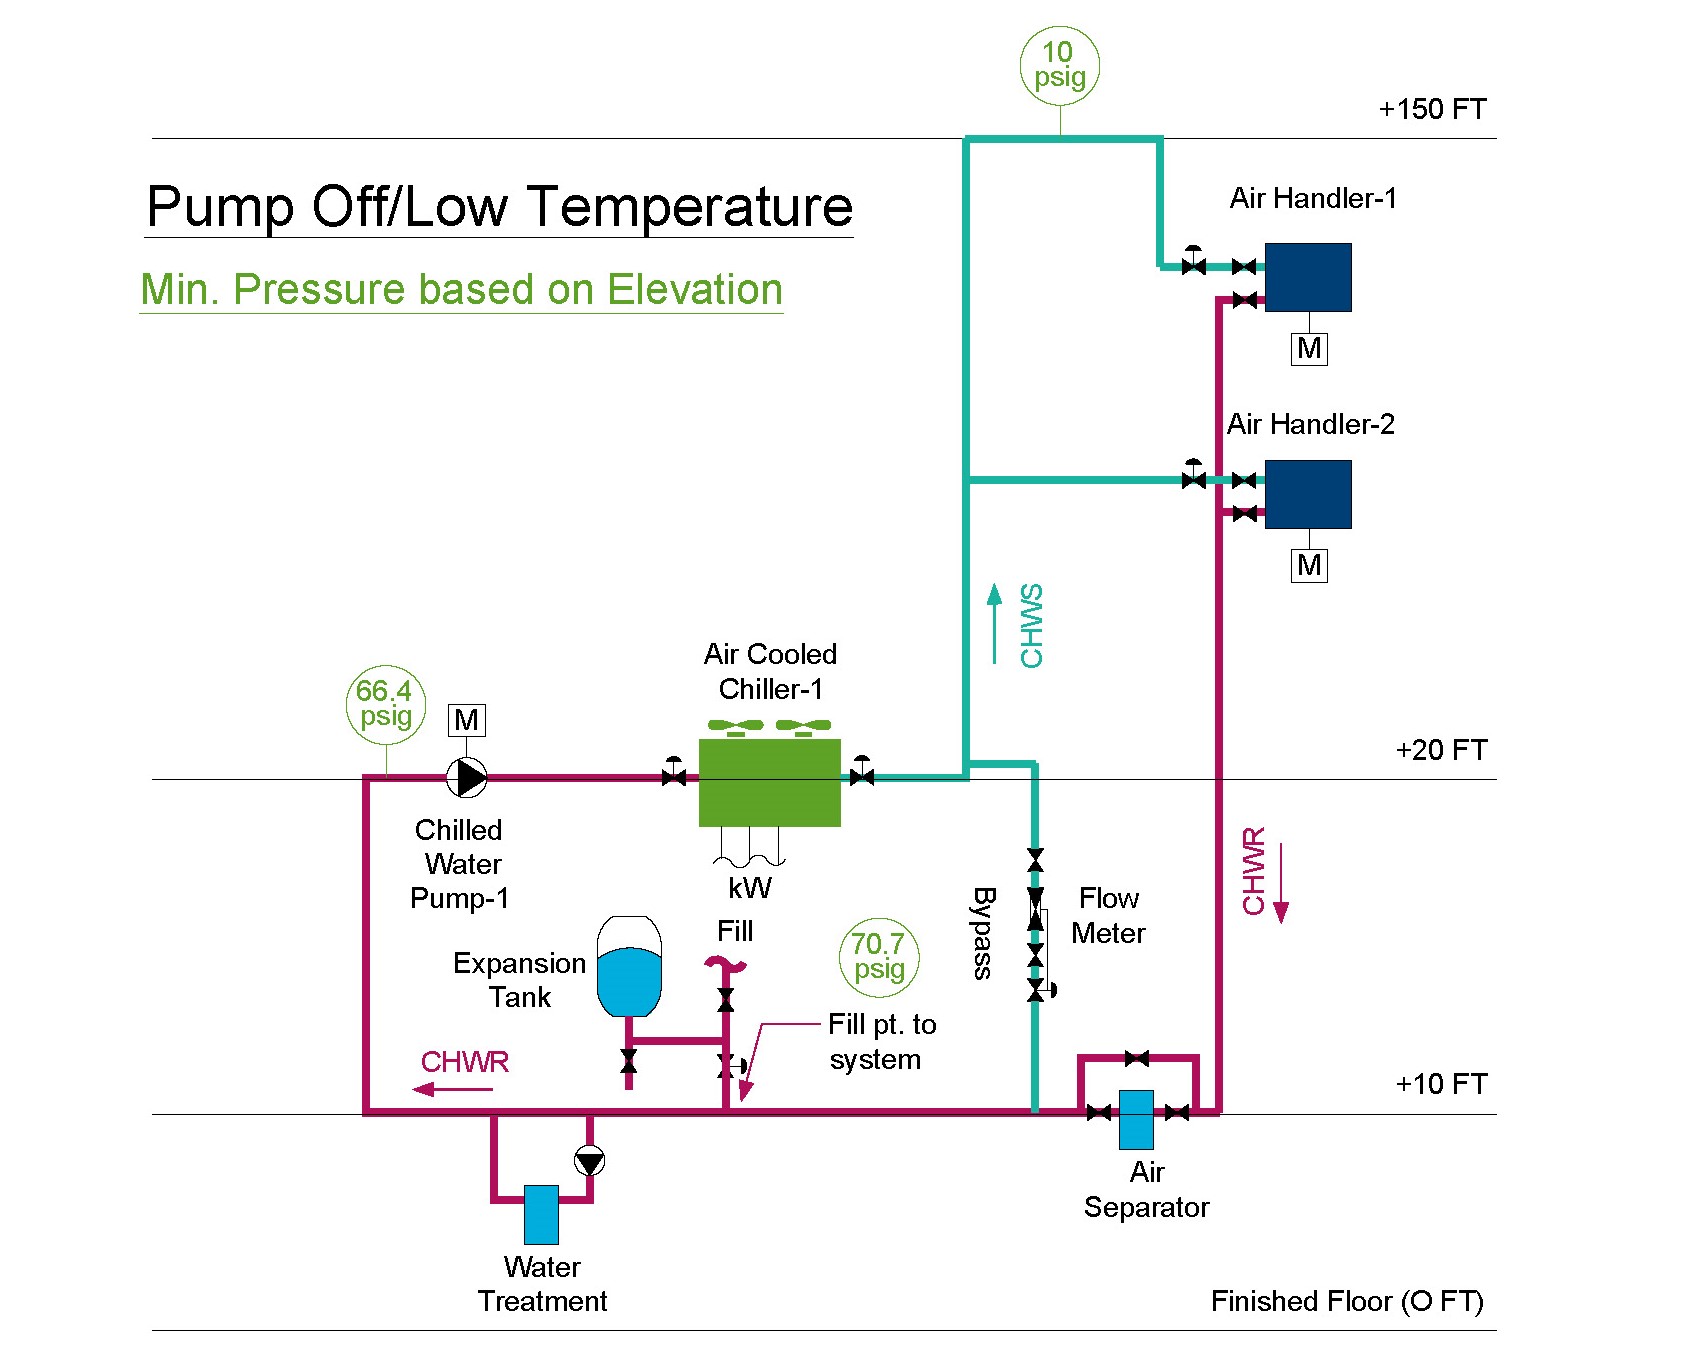 Chilled Water Diagram with an expansion tank with the pump off and the temperature at its lowest.